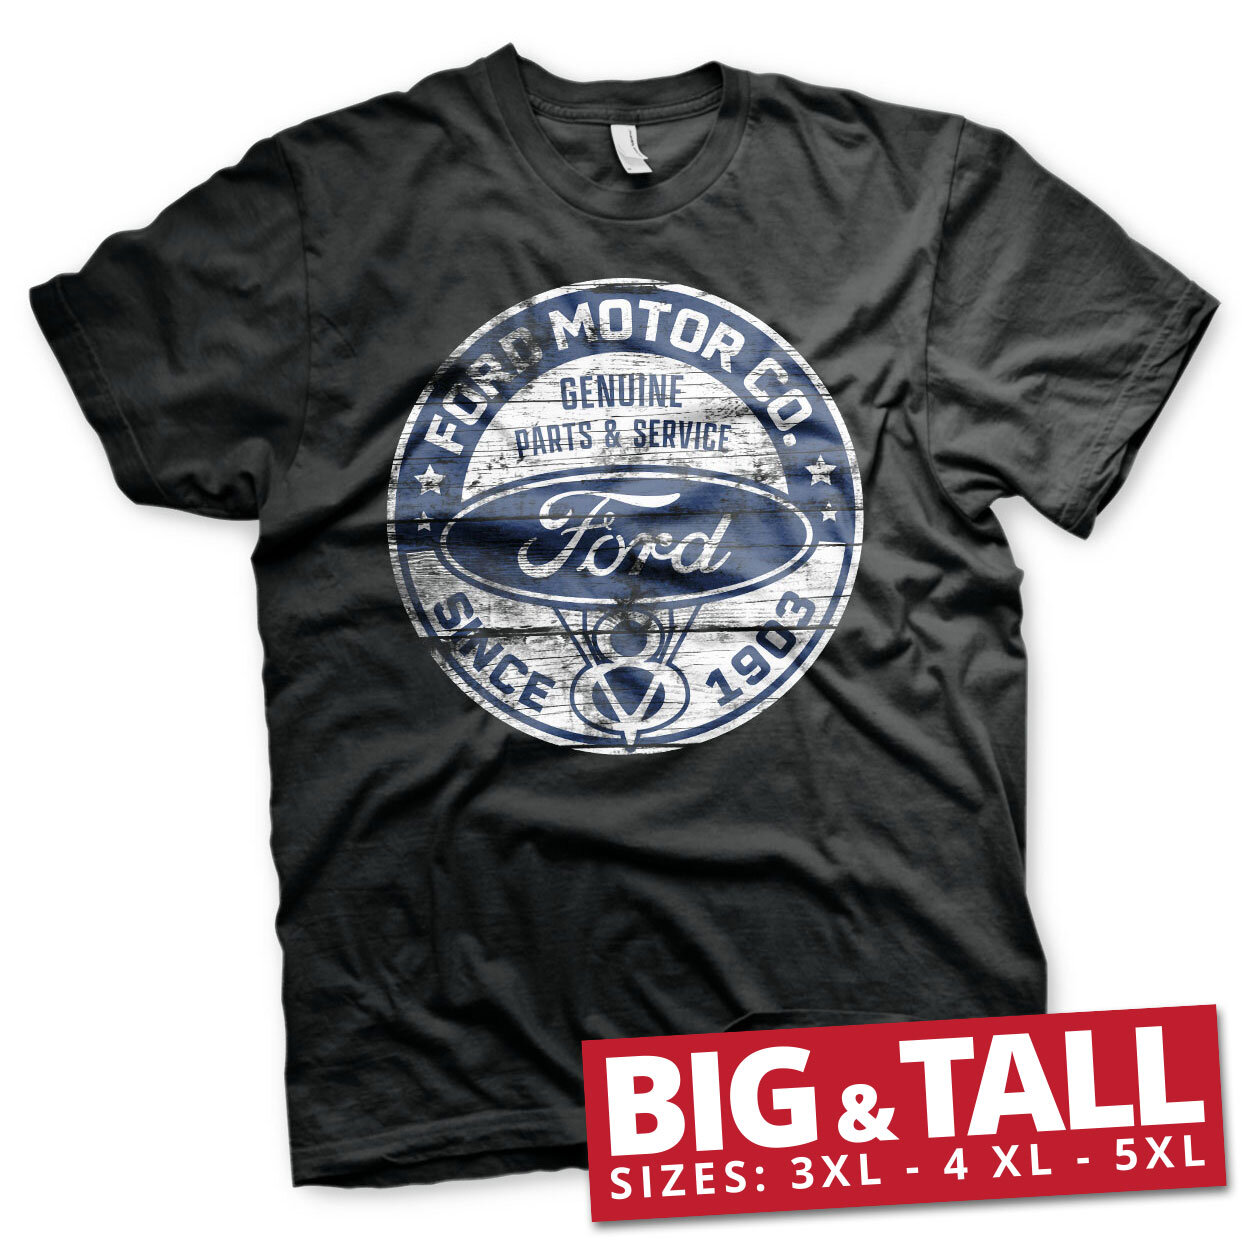 Ford Motor Co. Since 1903 Big & Tall T-Shirt